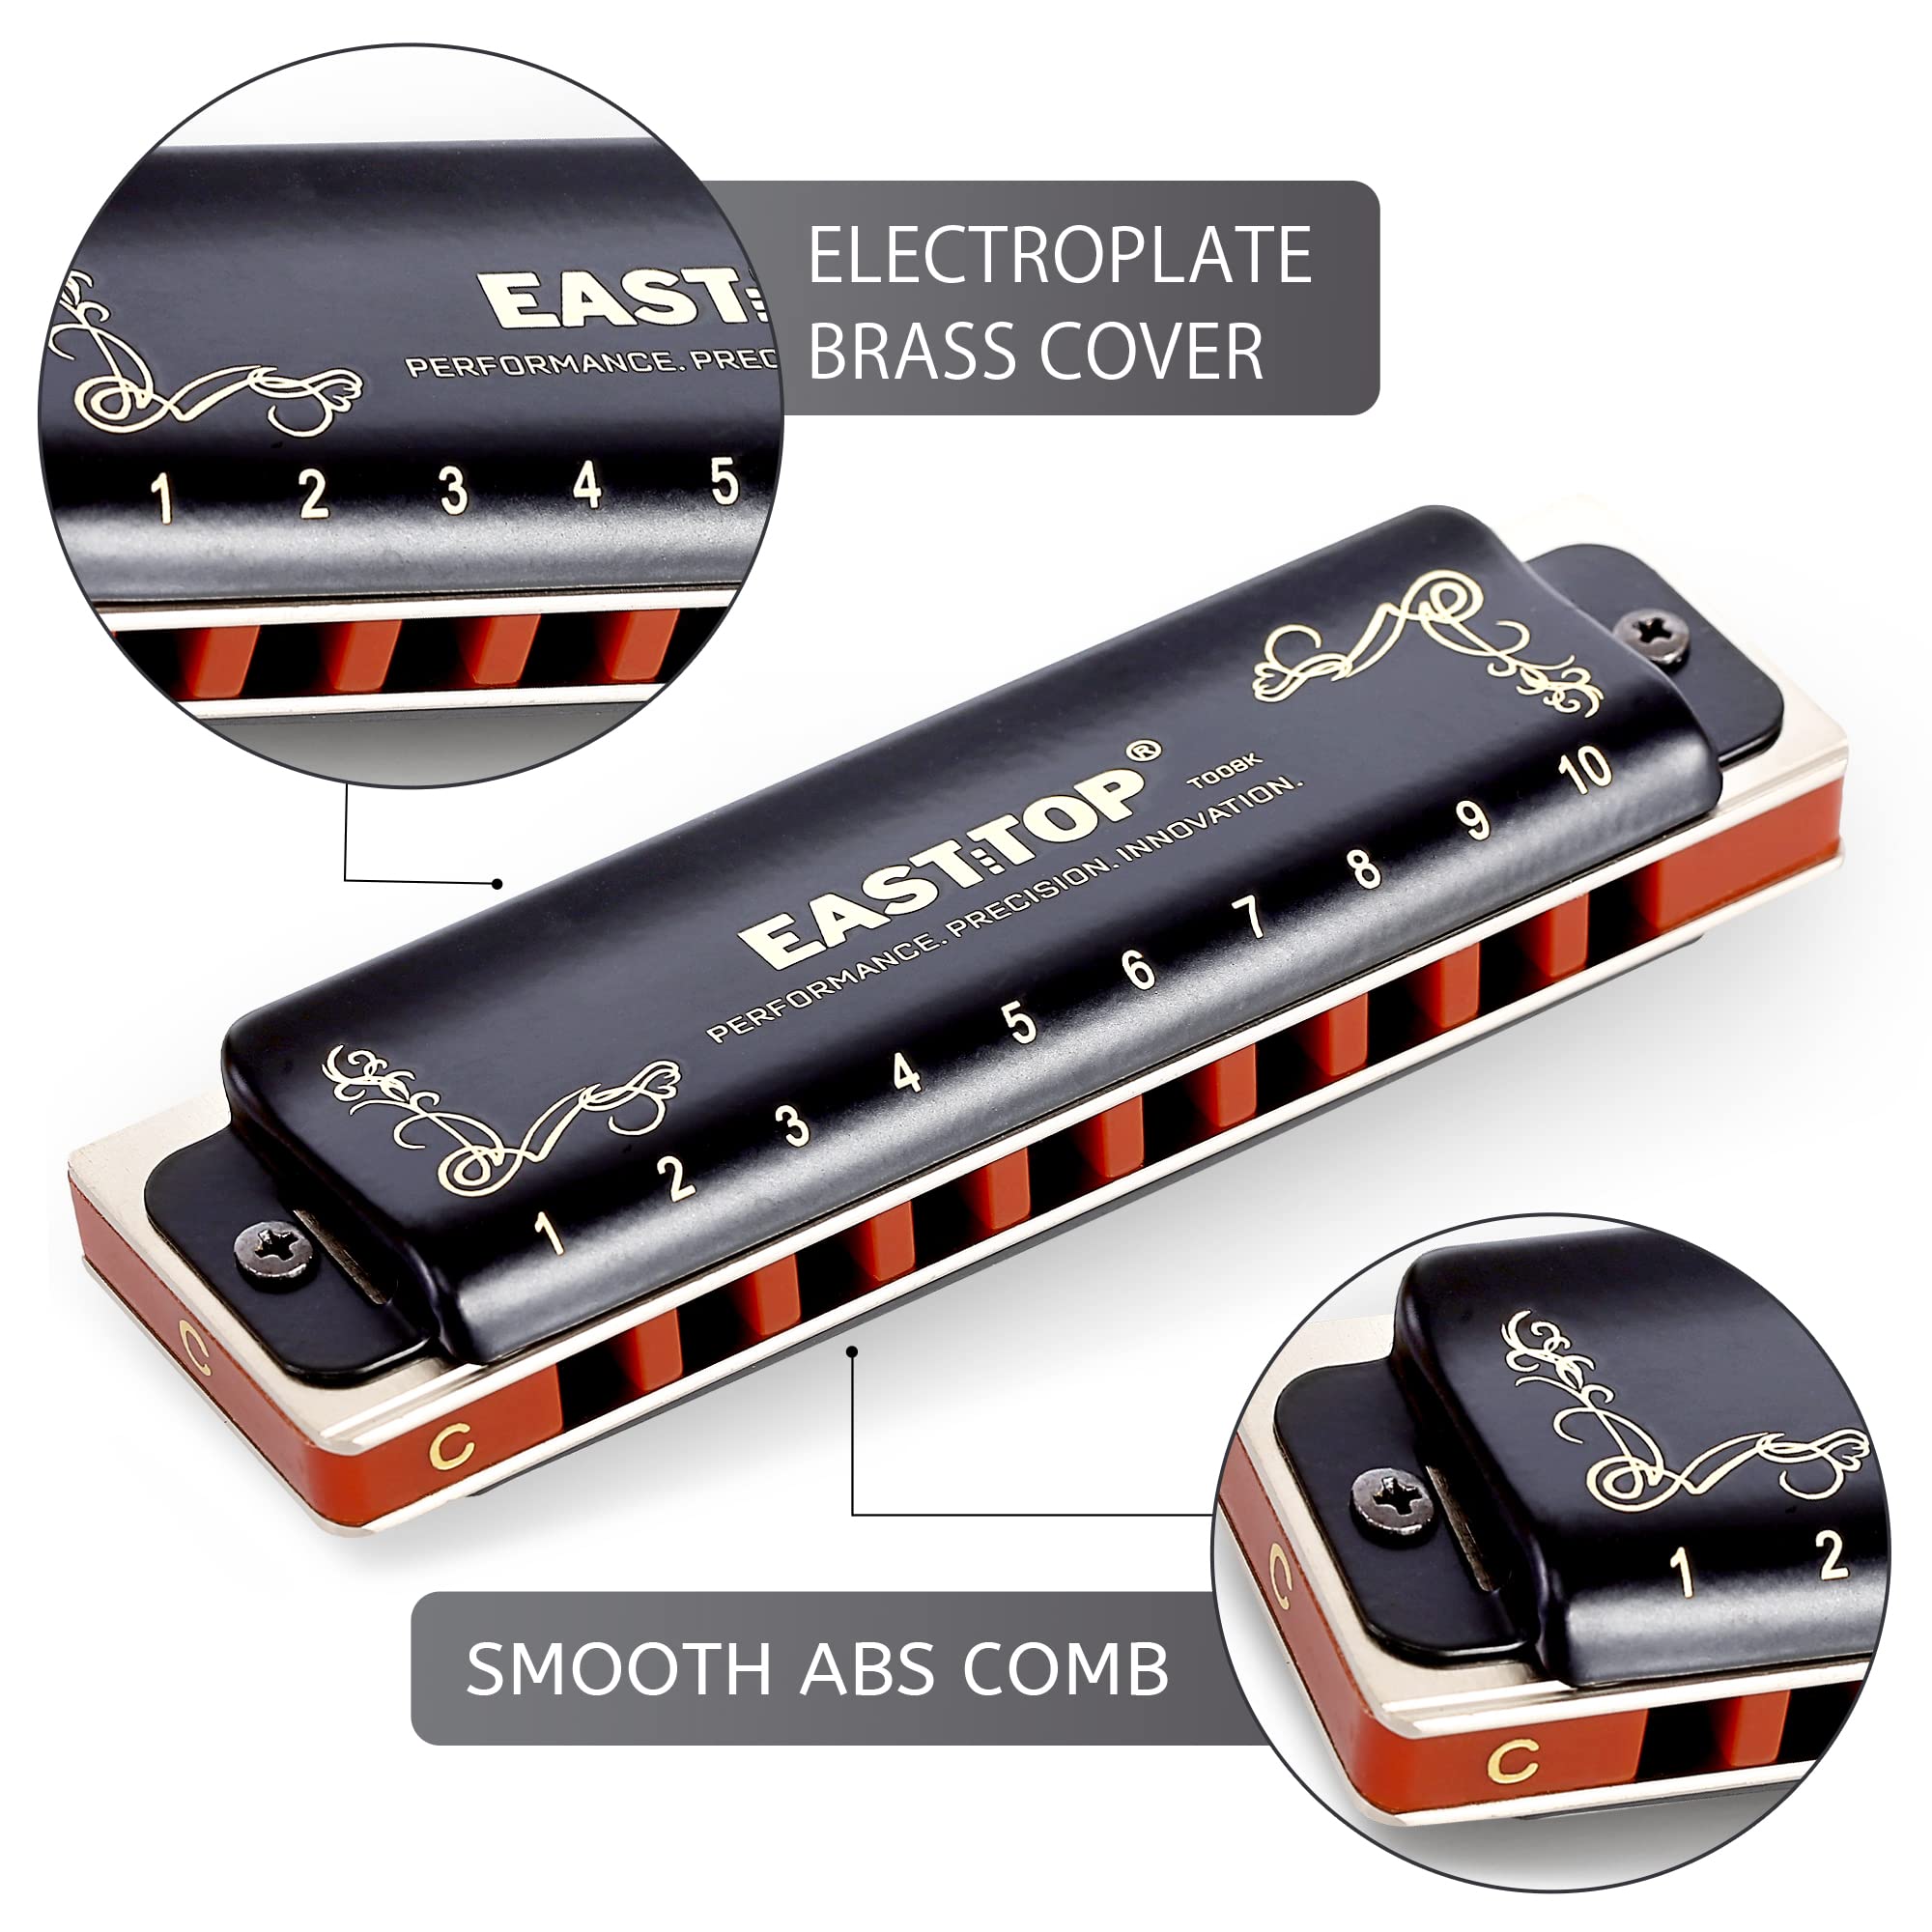 East top 10 Holes 20 Tones Professional Blues Diatonic Harmonica C Key, Updated harmonica for Adults, Professional Player, Beginner and Students(T008K-BK-C-N) - Easttop harmonica